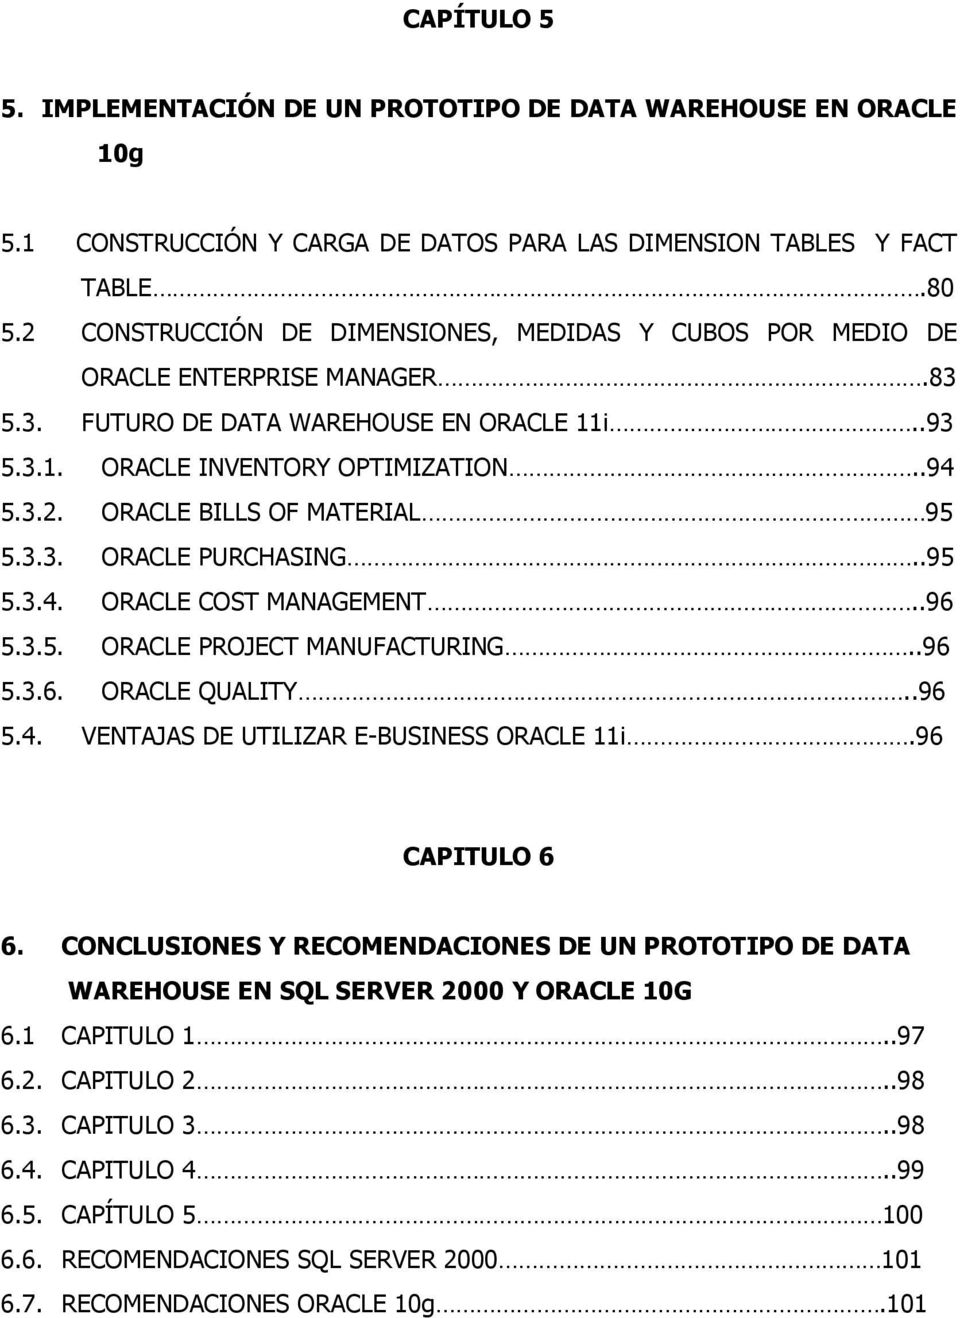 3.3. ORACLE PURCHASING..95 5.3.4. ORACLE COST MANAGEMENT..96 5.3.5. ORACLE PROJECT MANUFACTURING..96 5.3.6. ORACLE QUALITY..96 5.4. VENTAJAS DE UTILIZAR E-BUSINESS ORACLE 11i.96 CAPITULO 6 6.